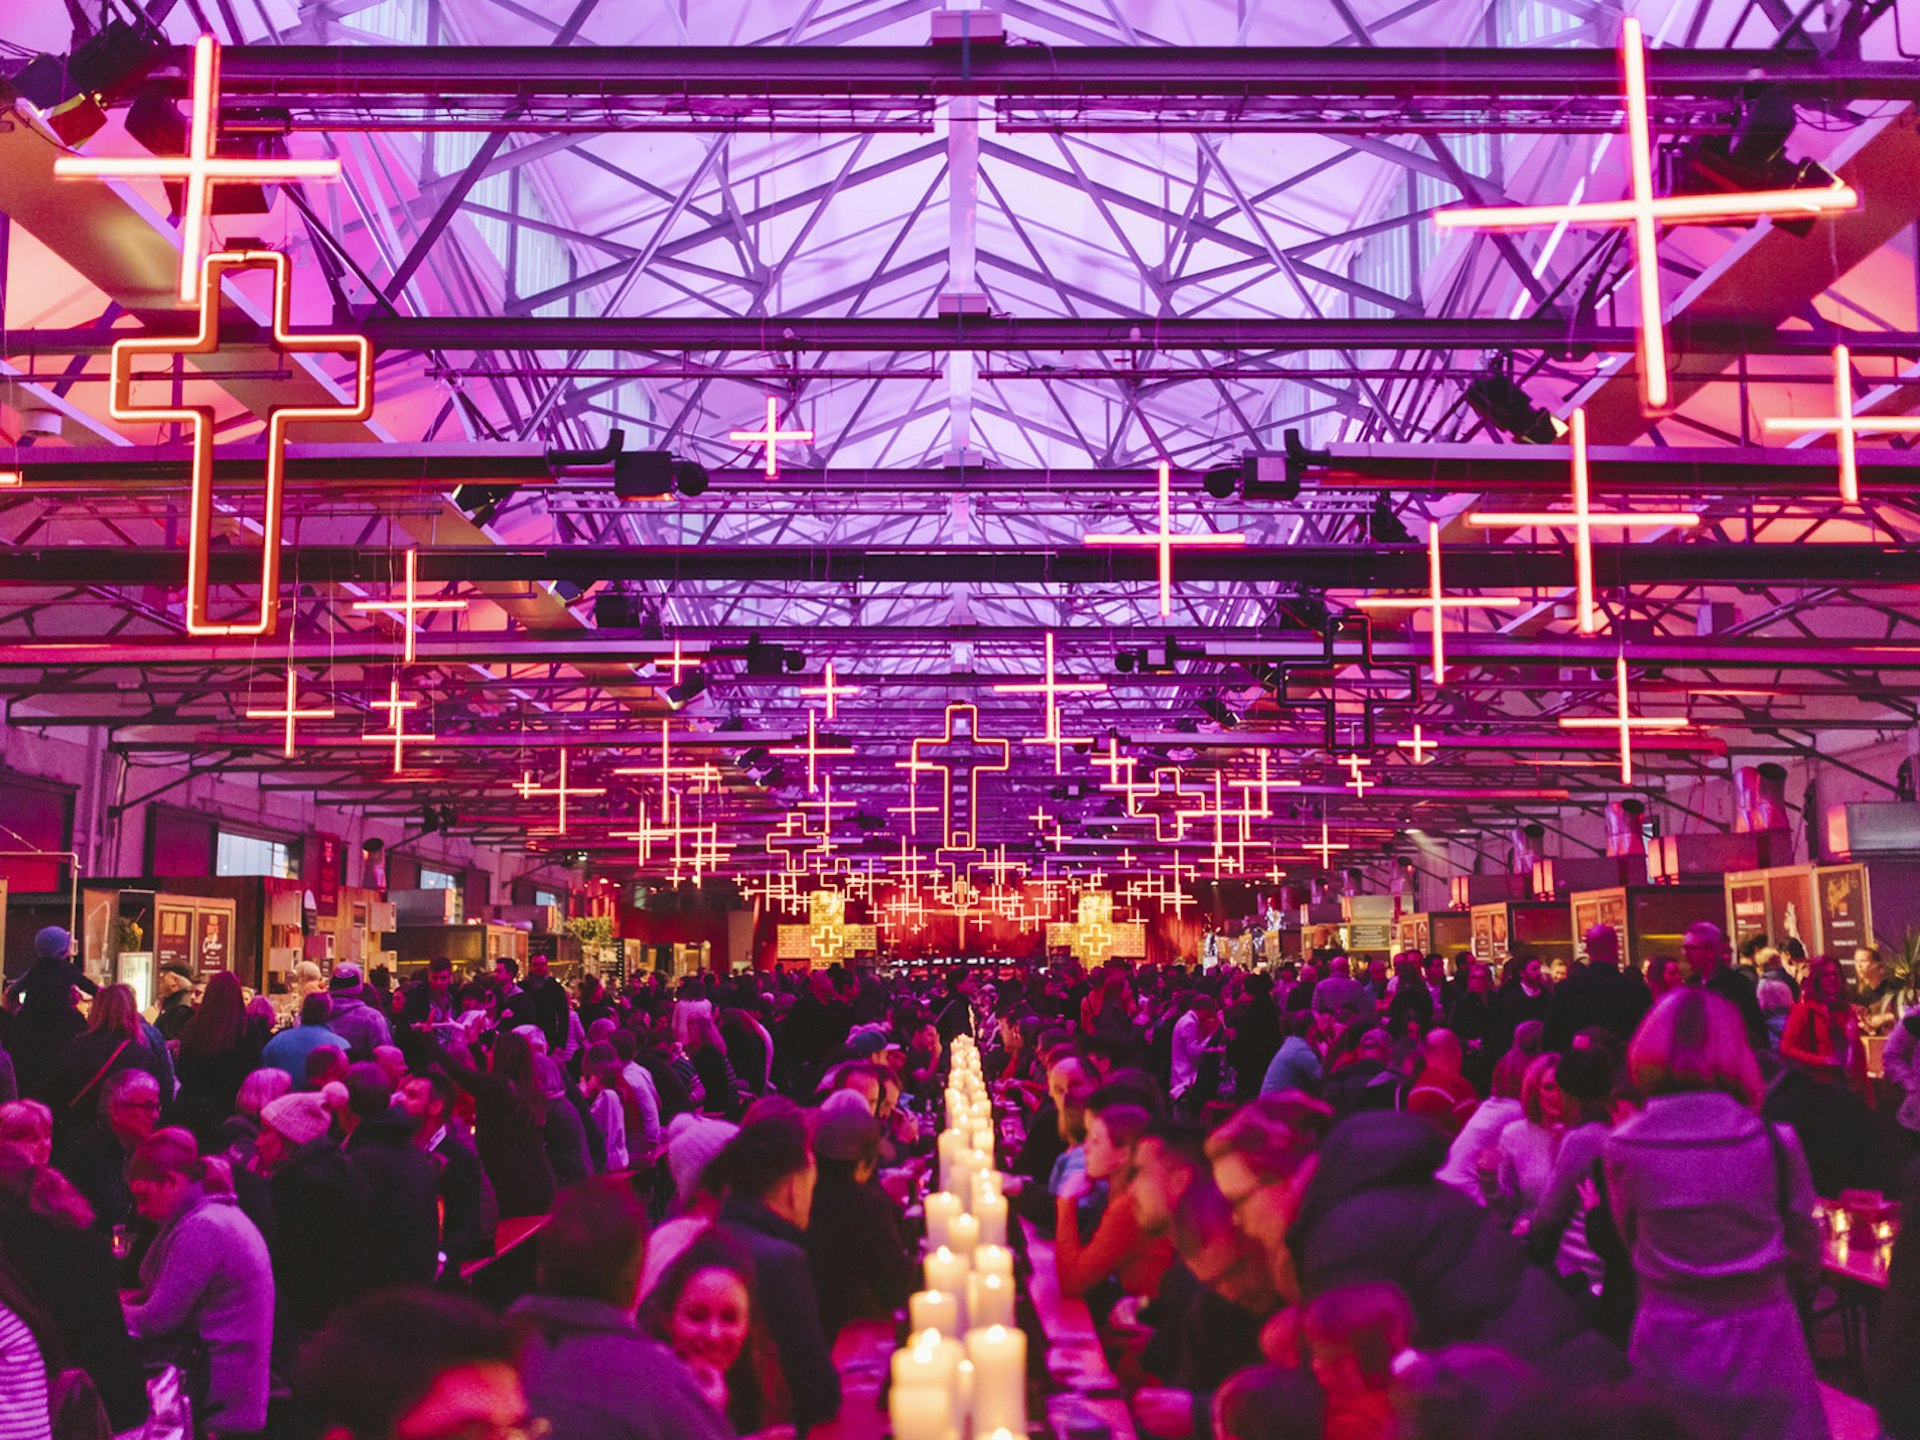 Alternative festivals - crowds gather, seated at long tables, for the winter feast at Dark MOFO in a hall decked in purple light, illuminated crosses and candles